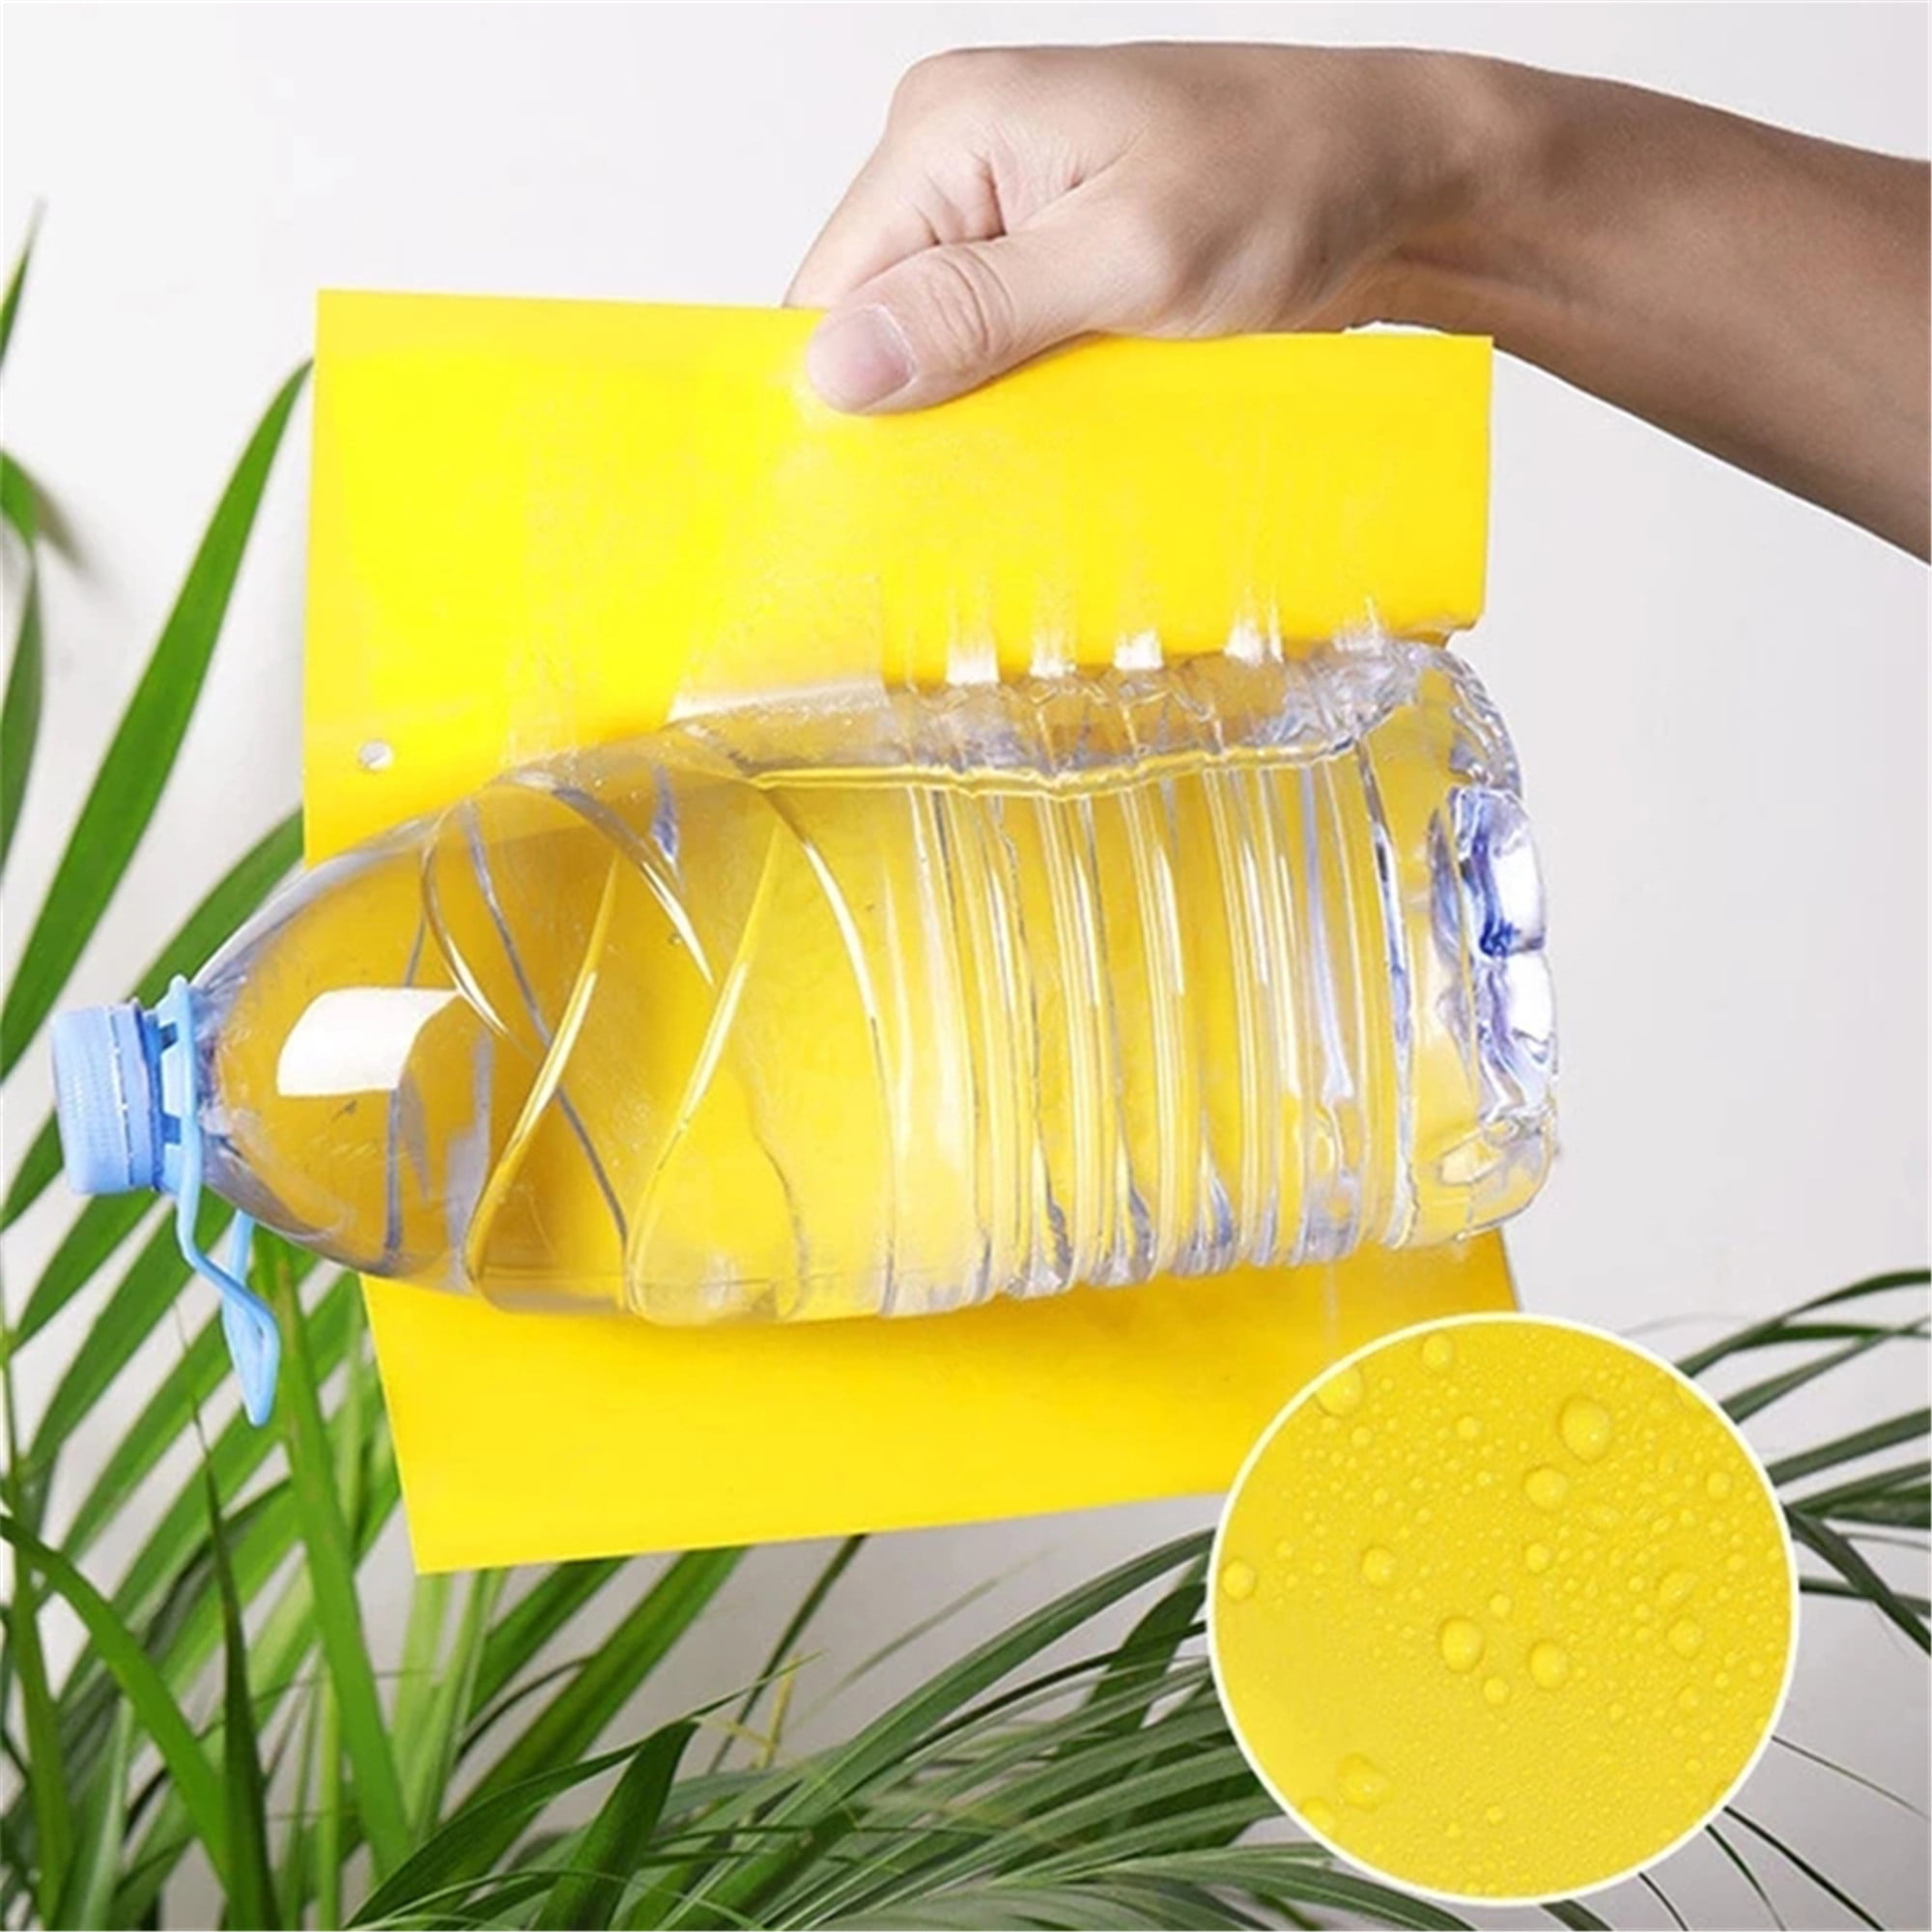 Elbourn 20pcs Sticky Fruit Fly Trap and Fungus Gnat Traps for Indoor and Outdoor, Protect The Plant, Non-Toxic and Odorless, Size: 20PCS-a1, Yellow